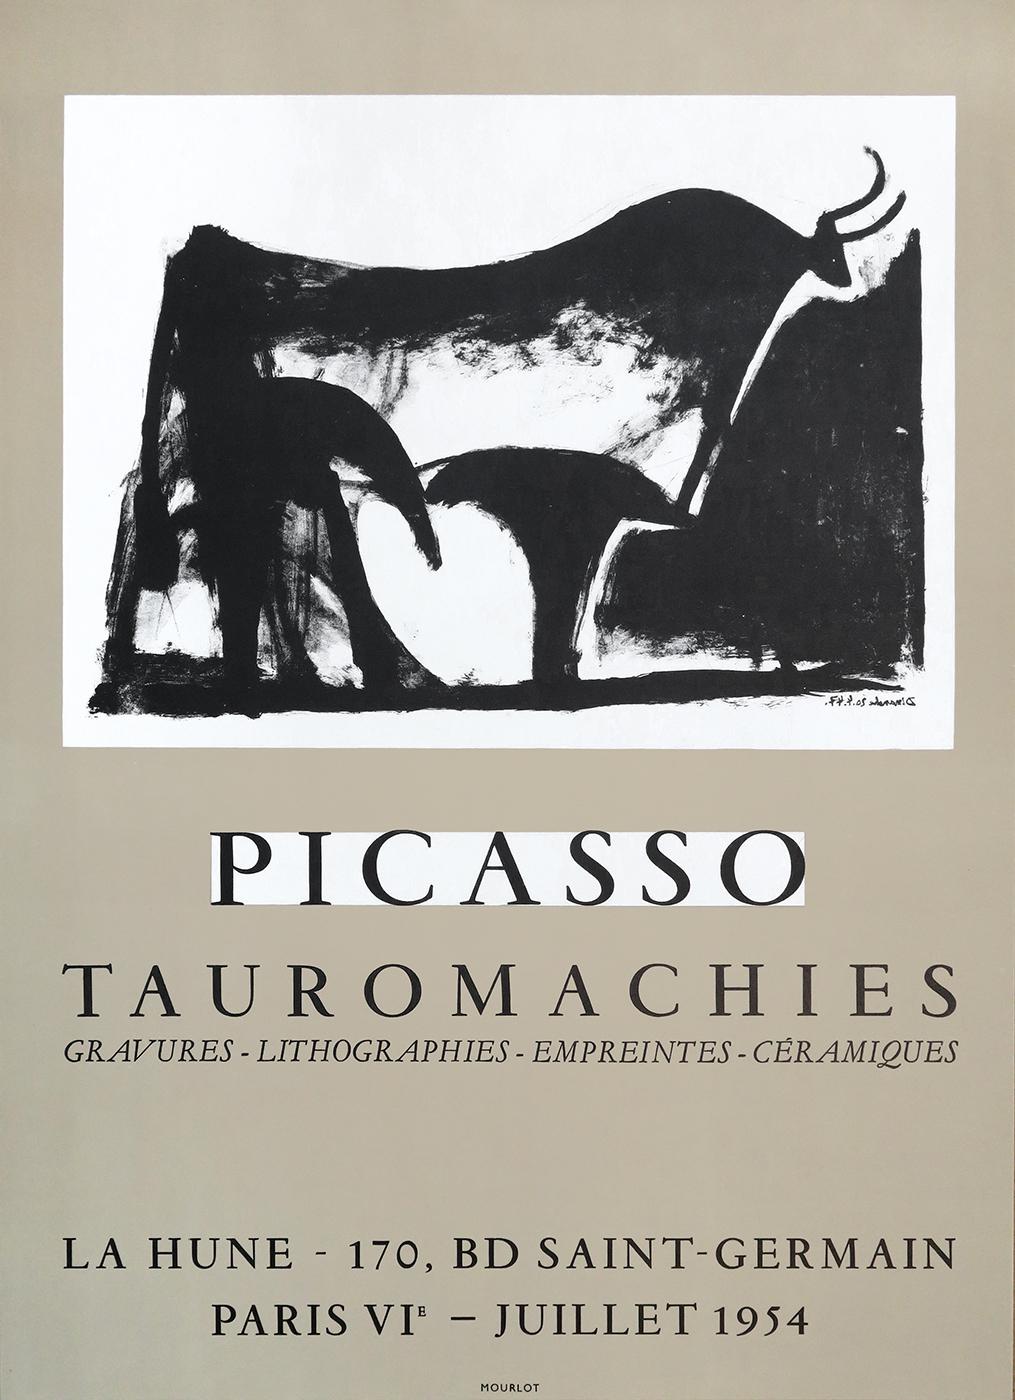 Modern Pablo Picasso, ‘Tauromachies' at La Hune, 1954 For Sale